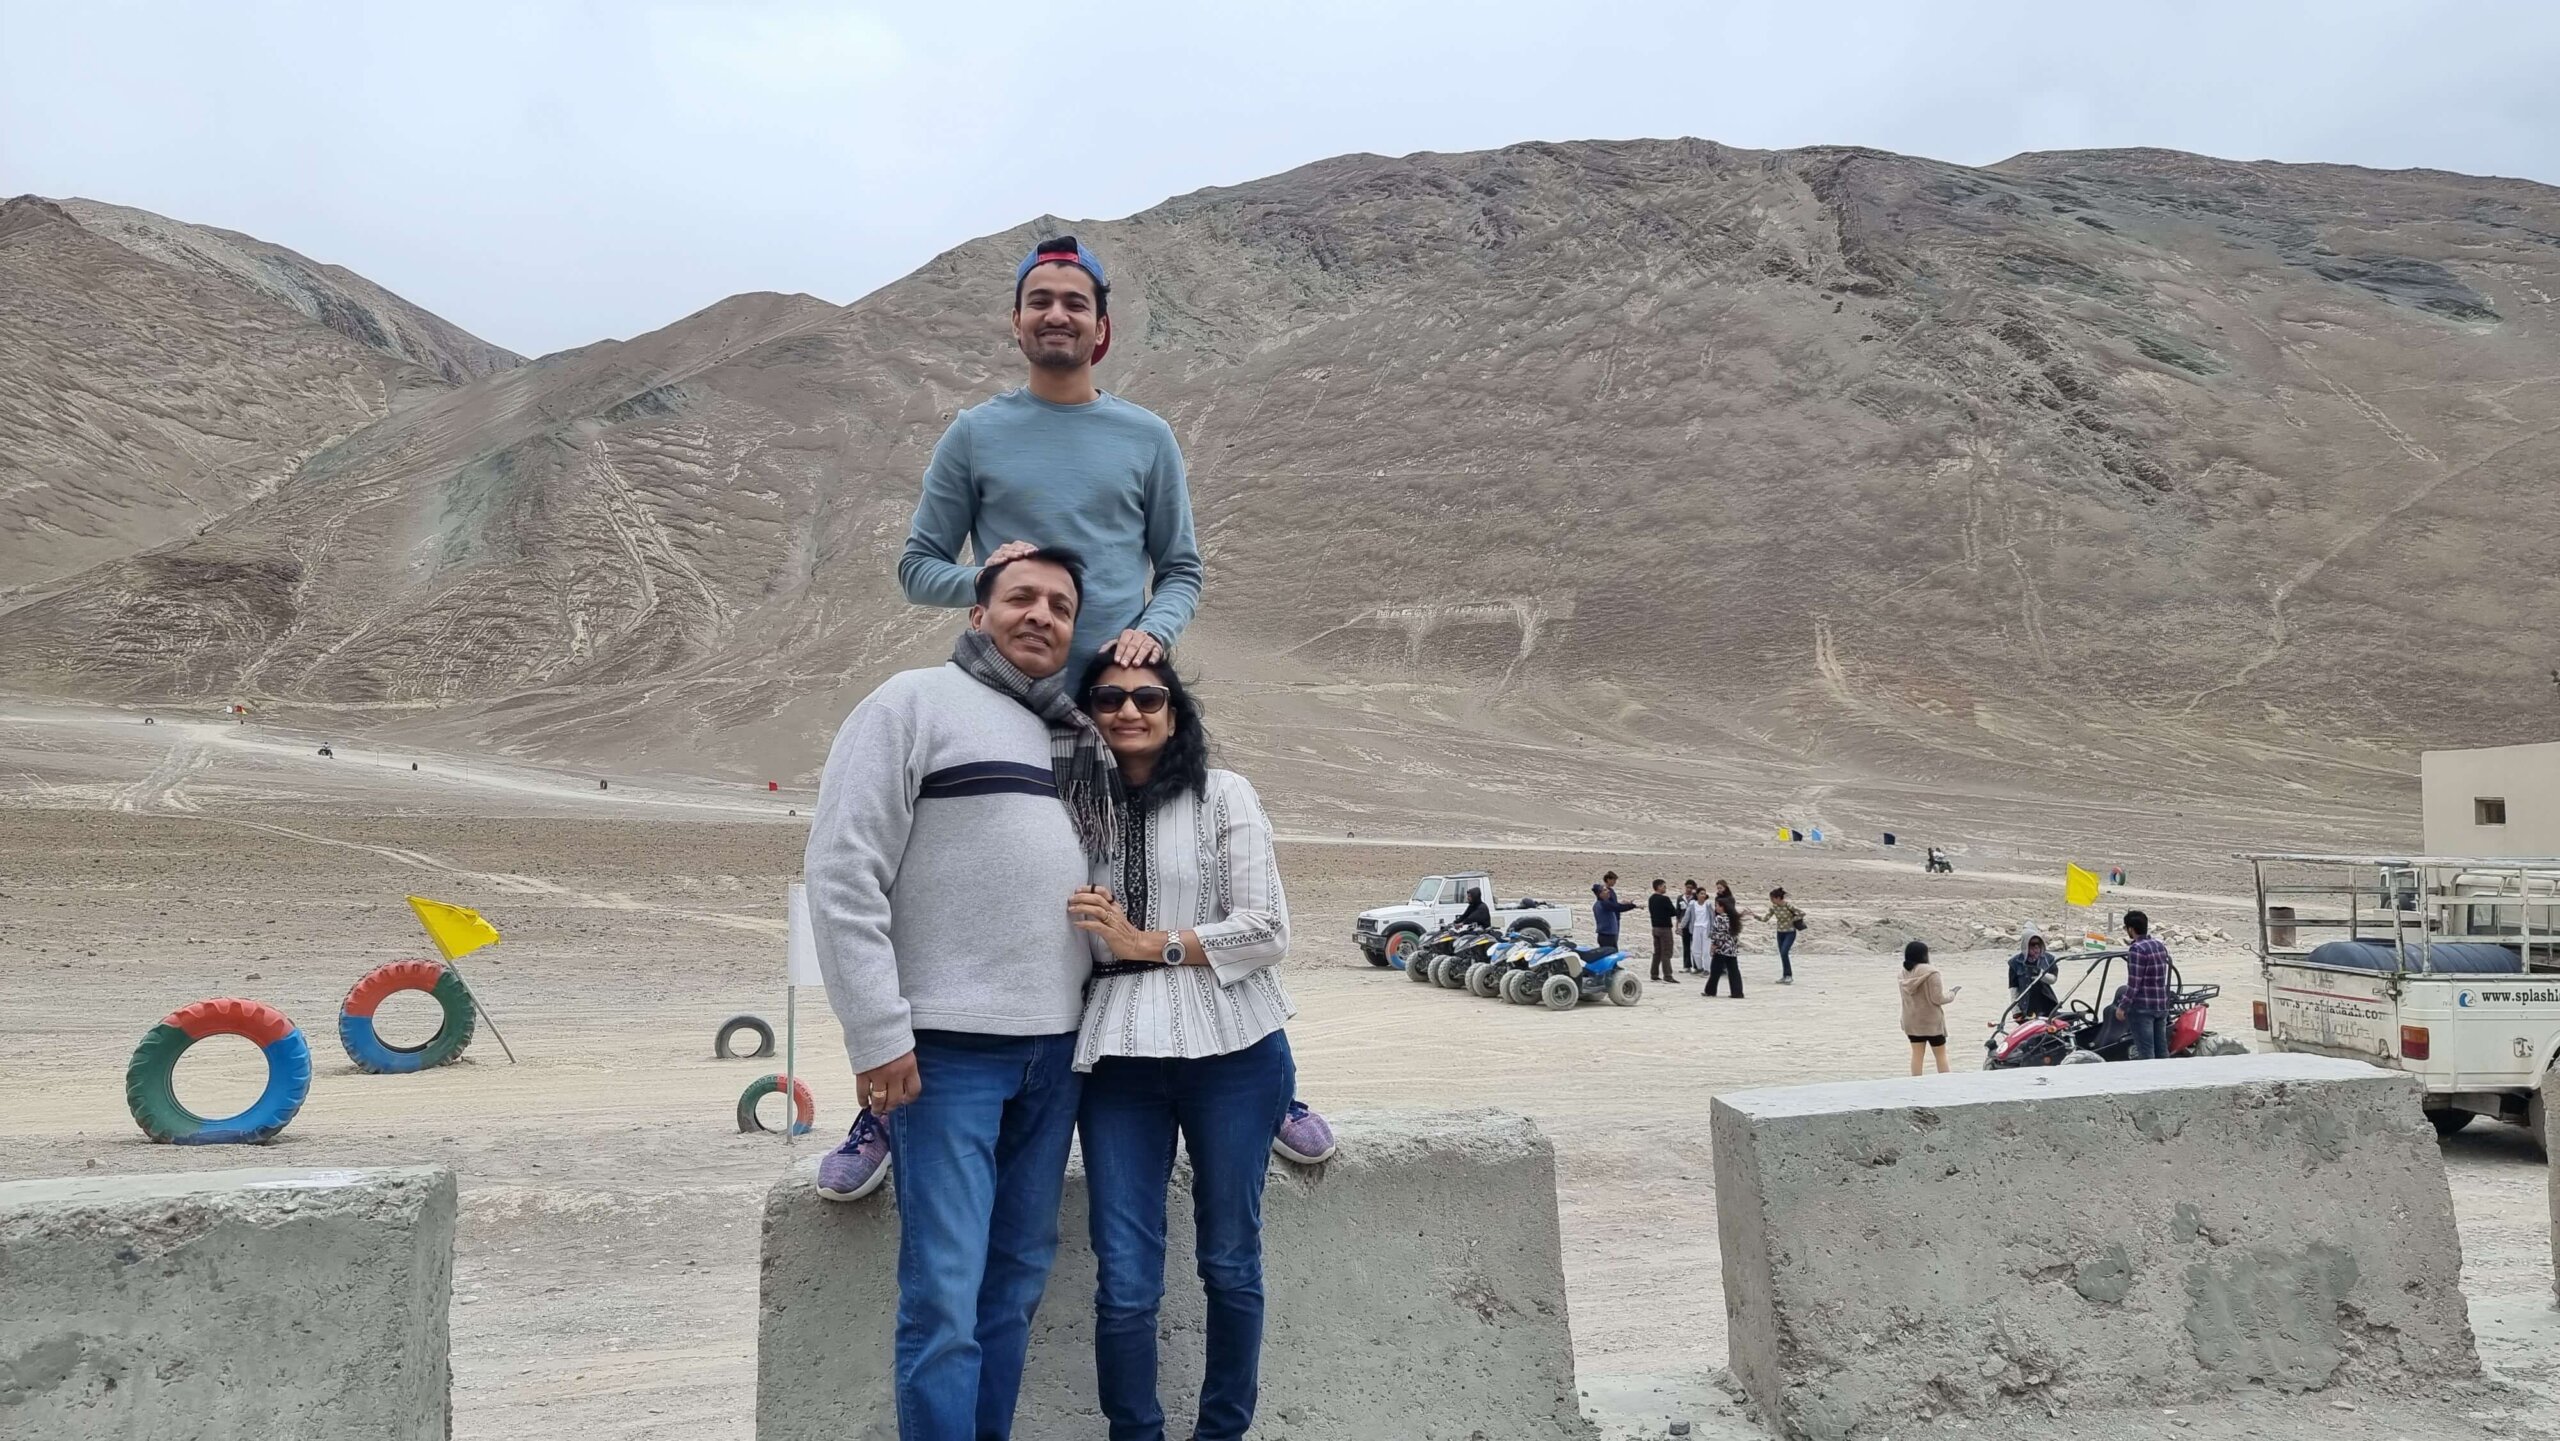 My parents & I at the Magnetic Hill in Ladakh